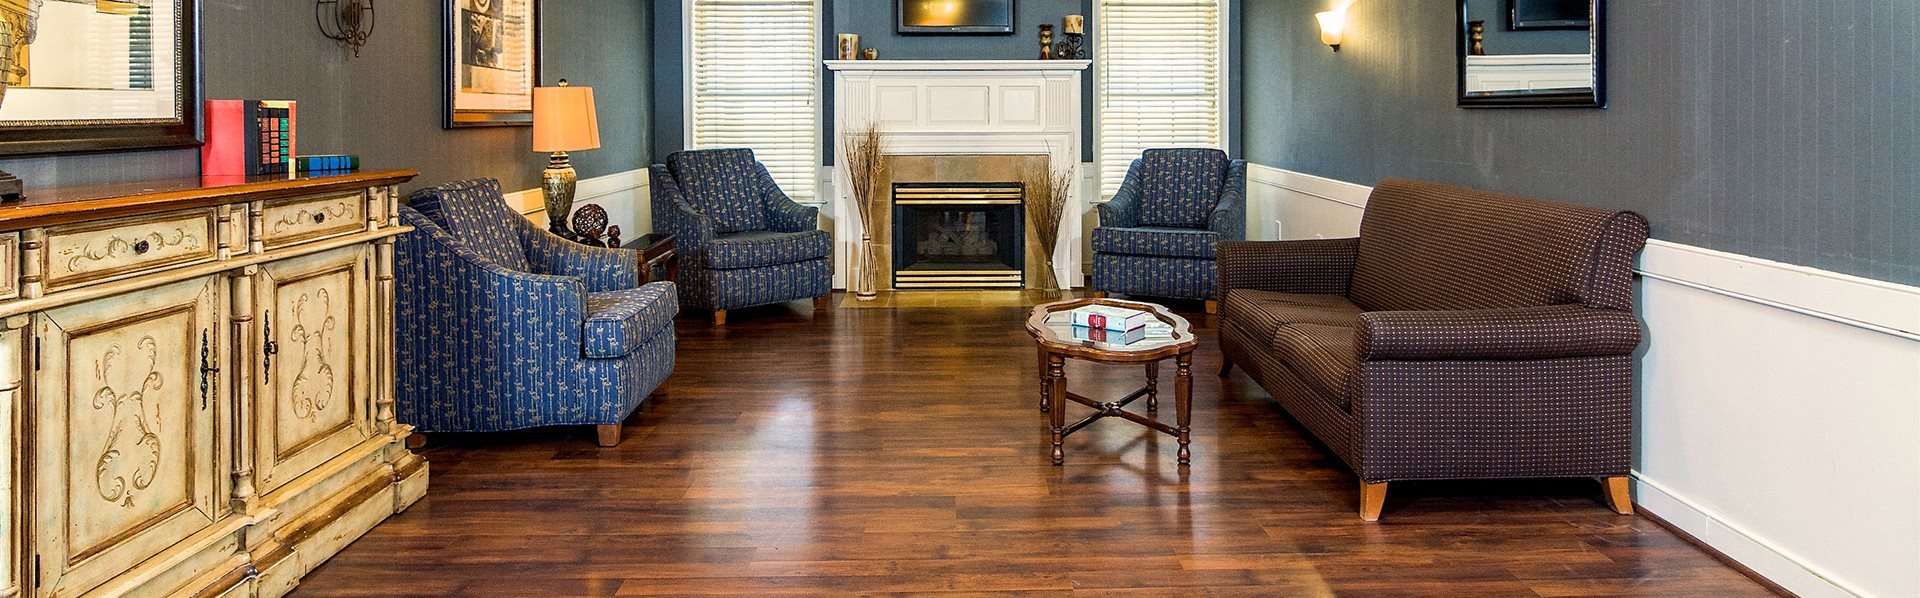 Lively Living Rooms at Pacifica Senior Living Victoria Court, Rhode Island